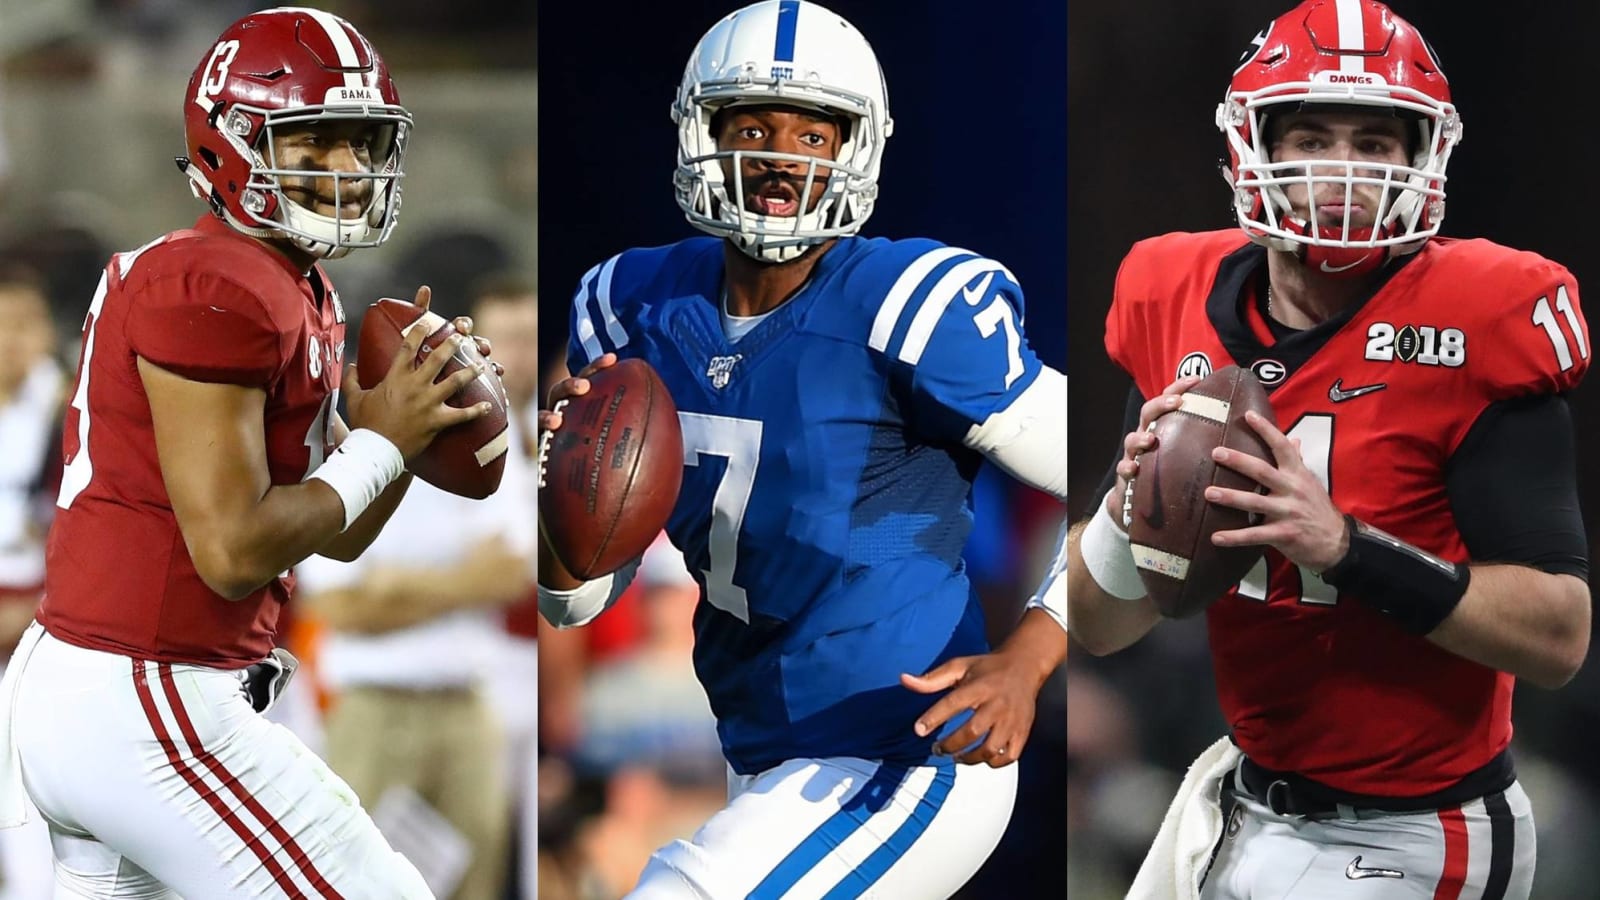 2020 vision: Why next year could be crazy for starting QB-needy NFL teams